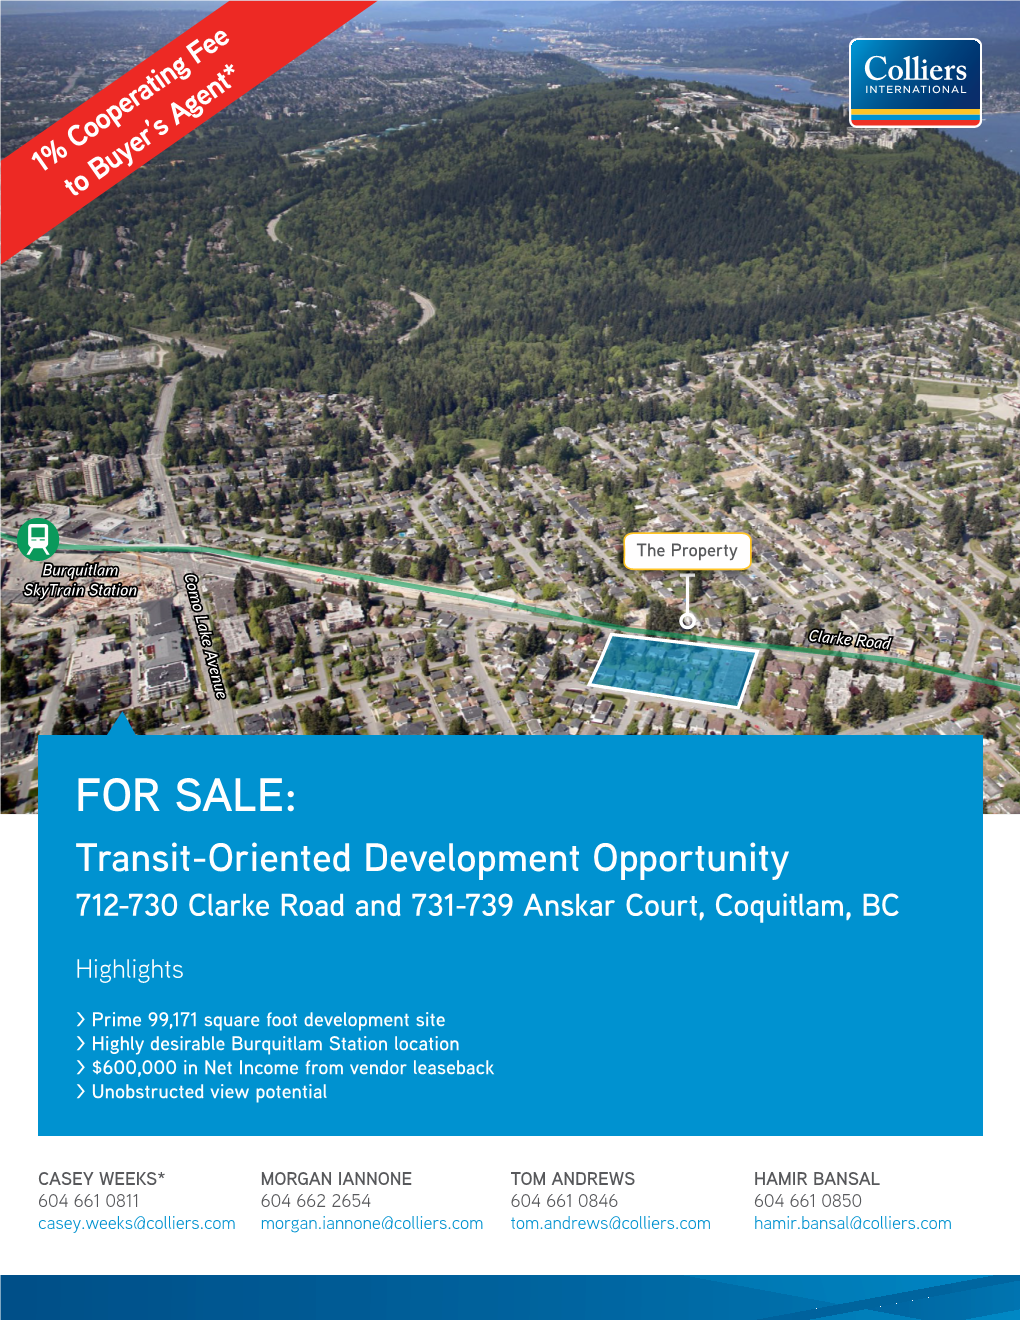 FOR SALE: Transit-Oriented Development Opportunity 712-730 Clarke Road and 731-739 Anskar Court, Coquitlam, BC